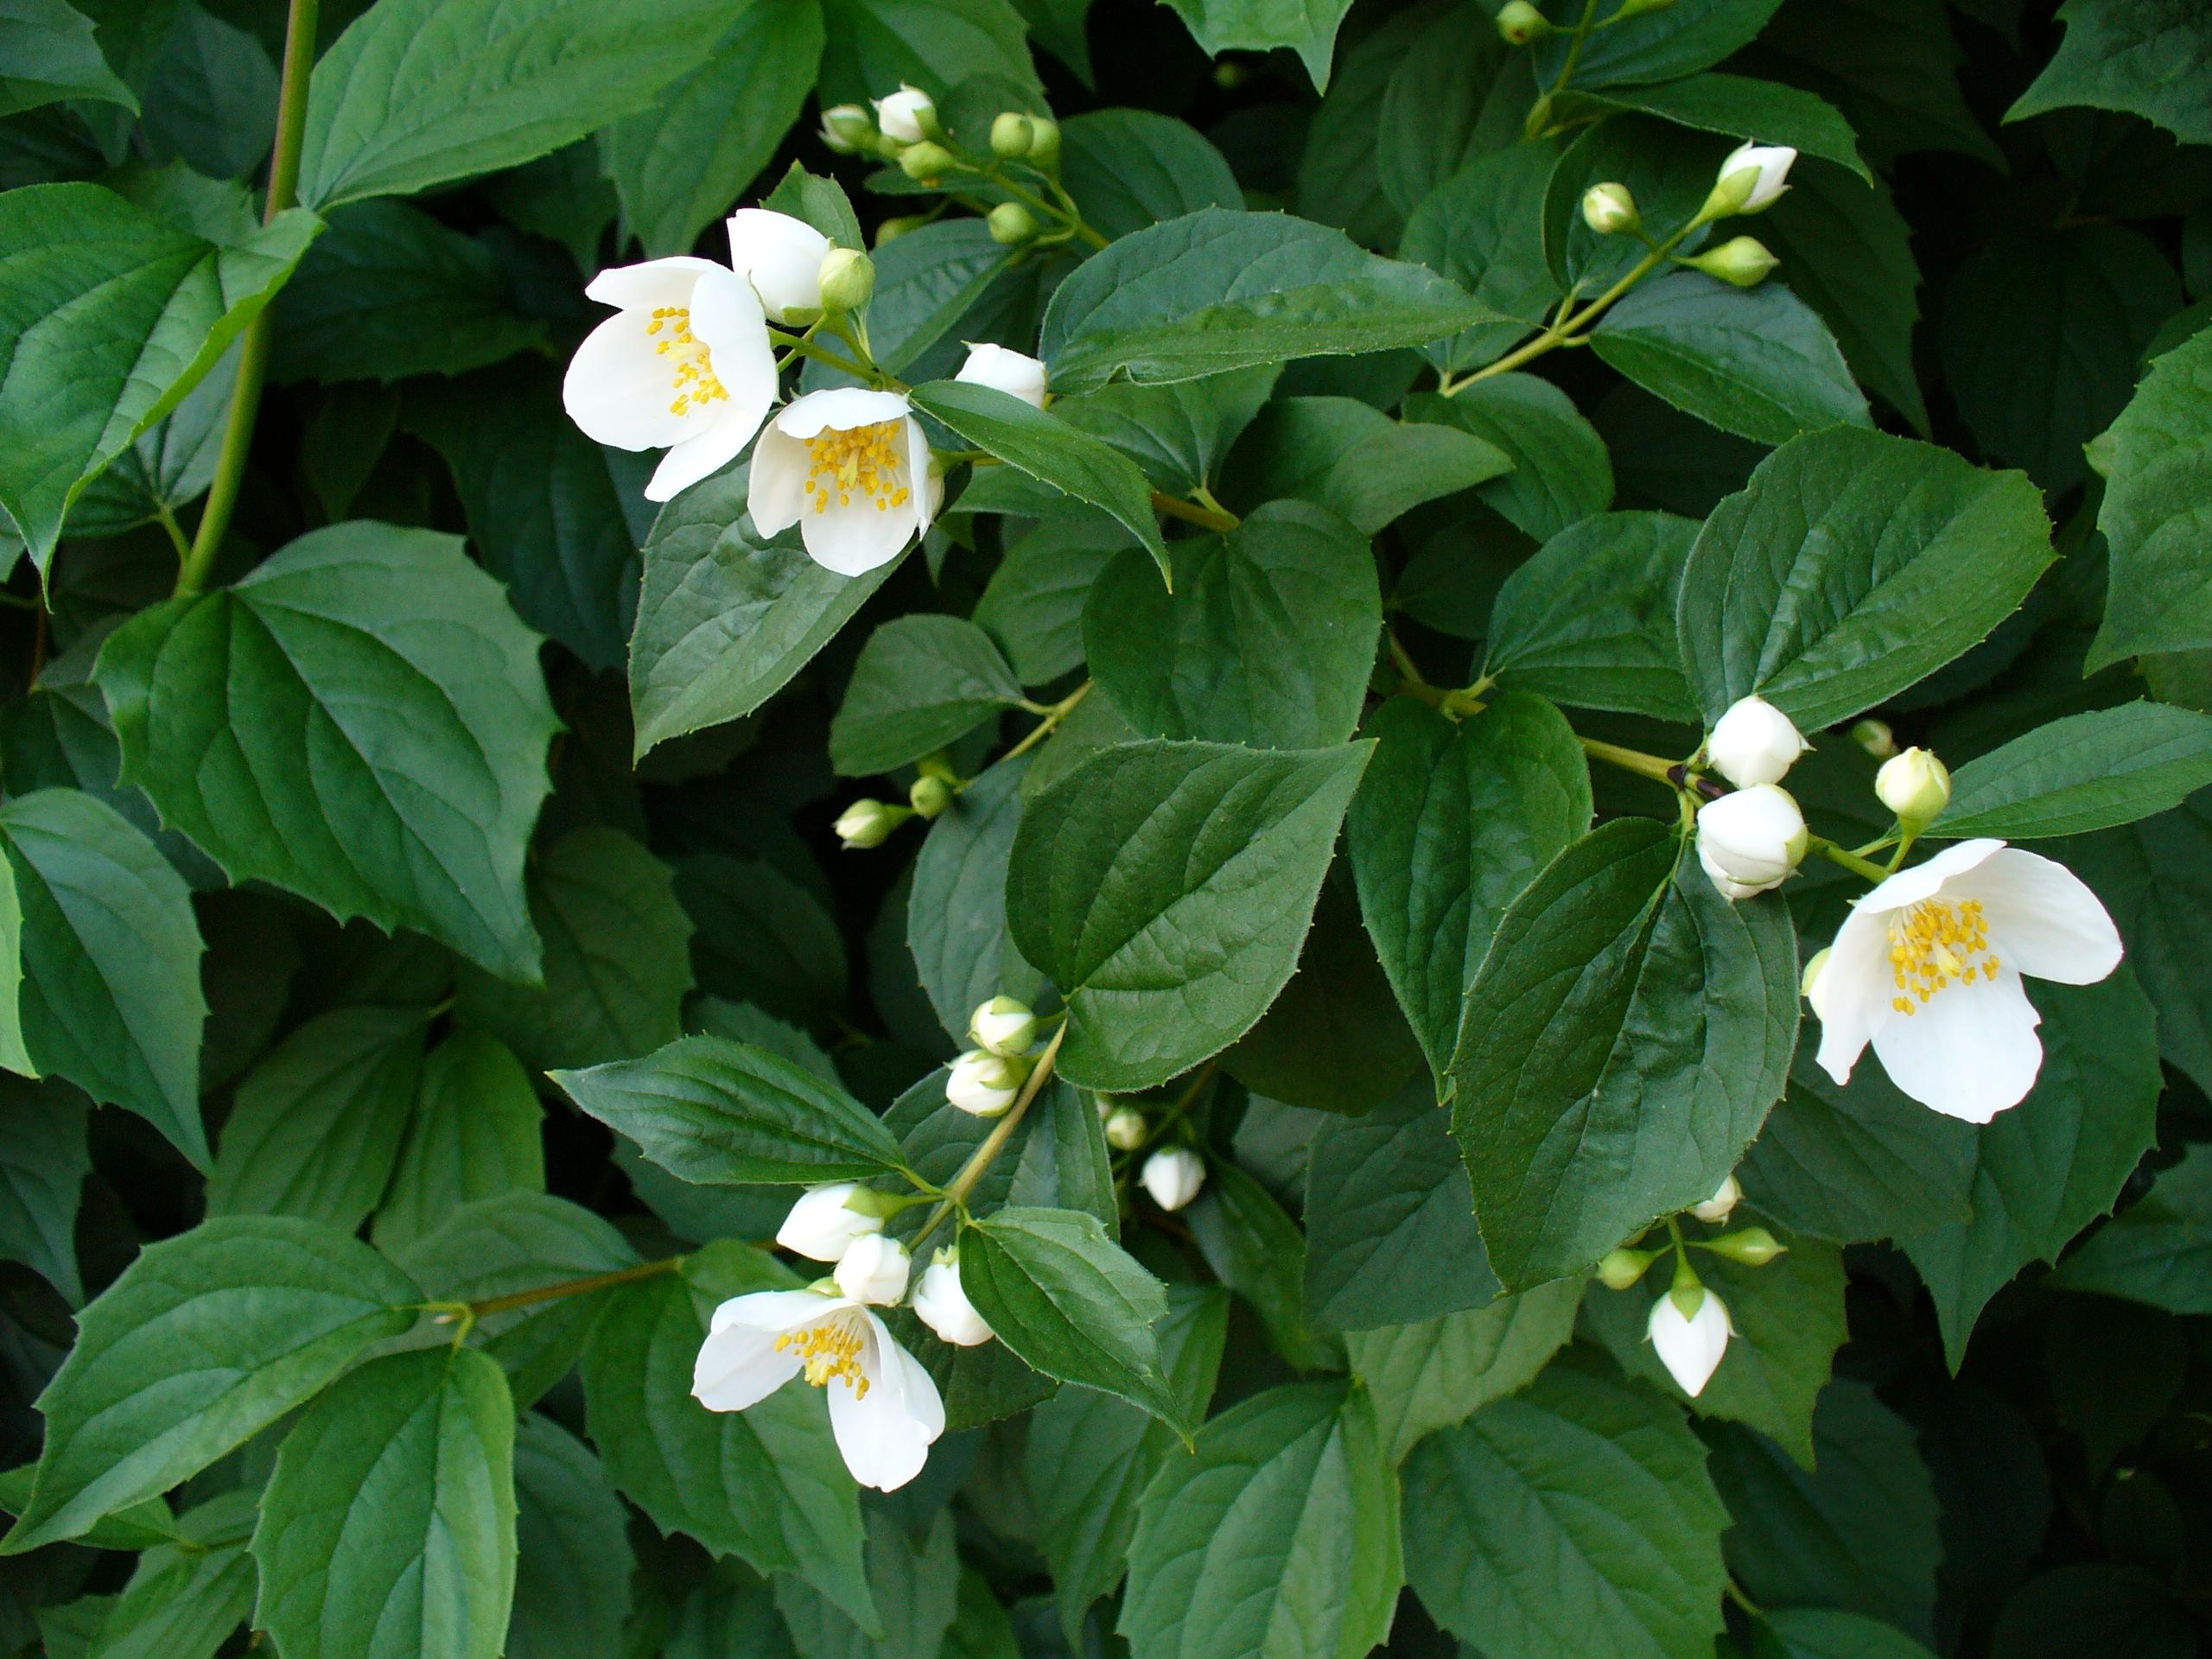 White flower with yellow stigma and stamen, white buds, yellow stems and green leaves